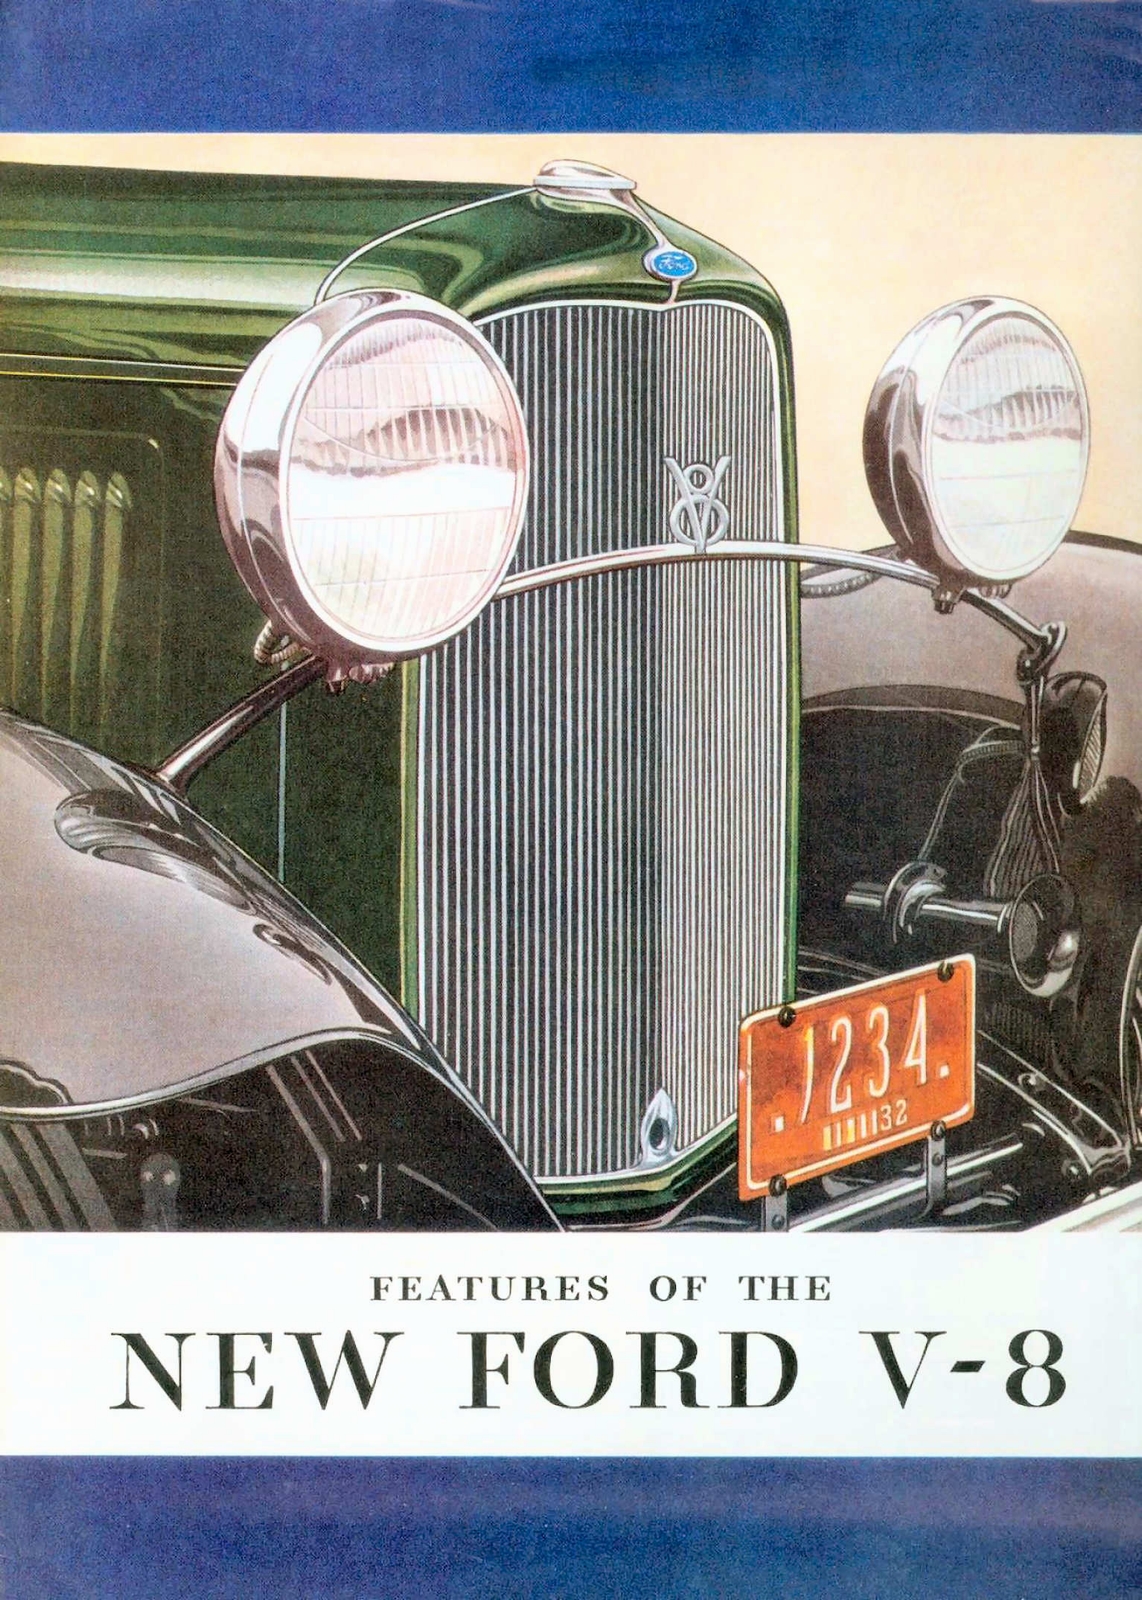 n_1932 Ford V-8 Features Foldout-01.jpg